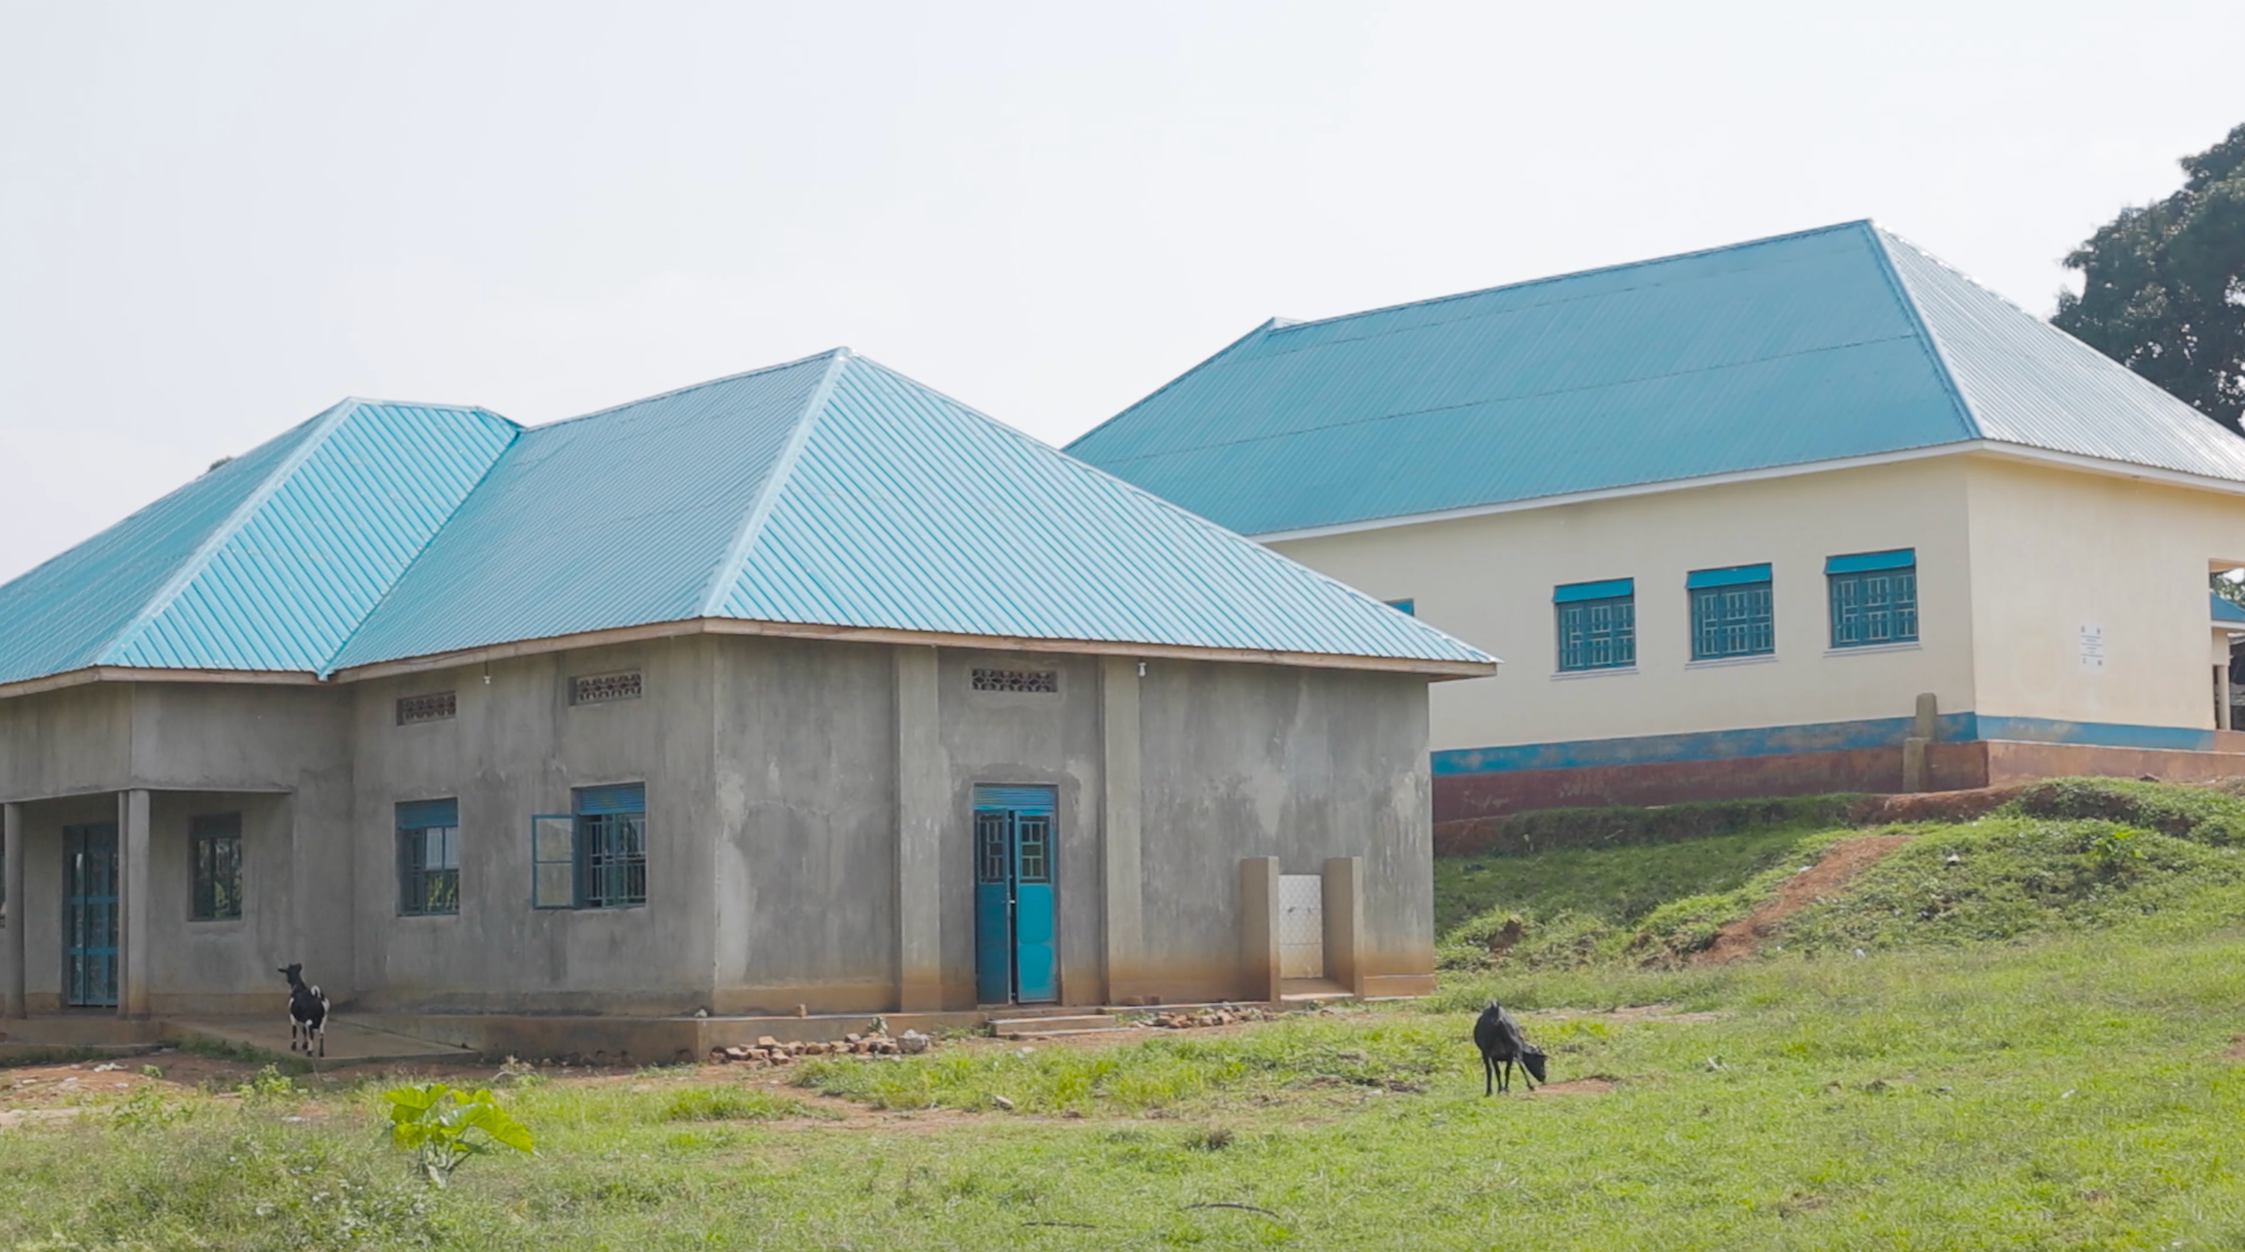 Two new school buildings on a grassy hill with some goats grazing